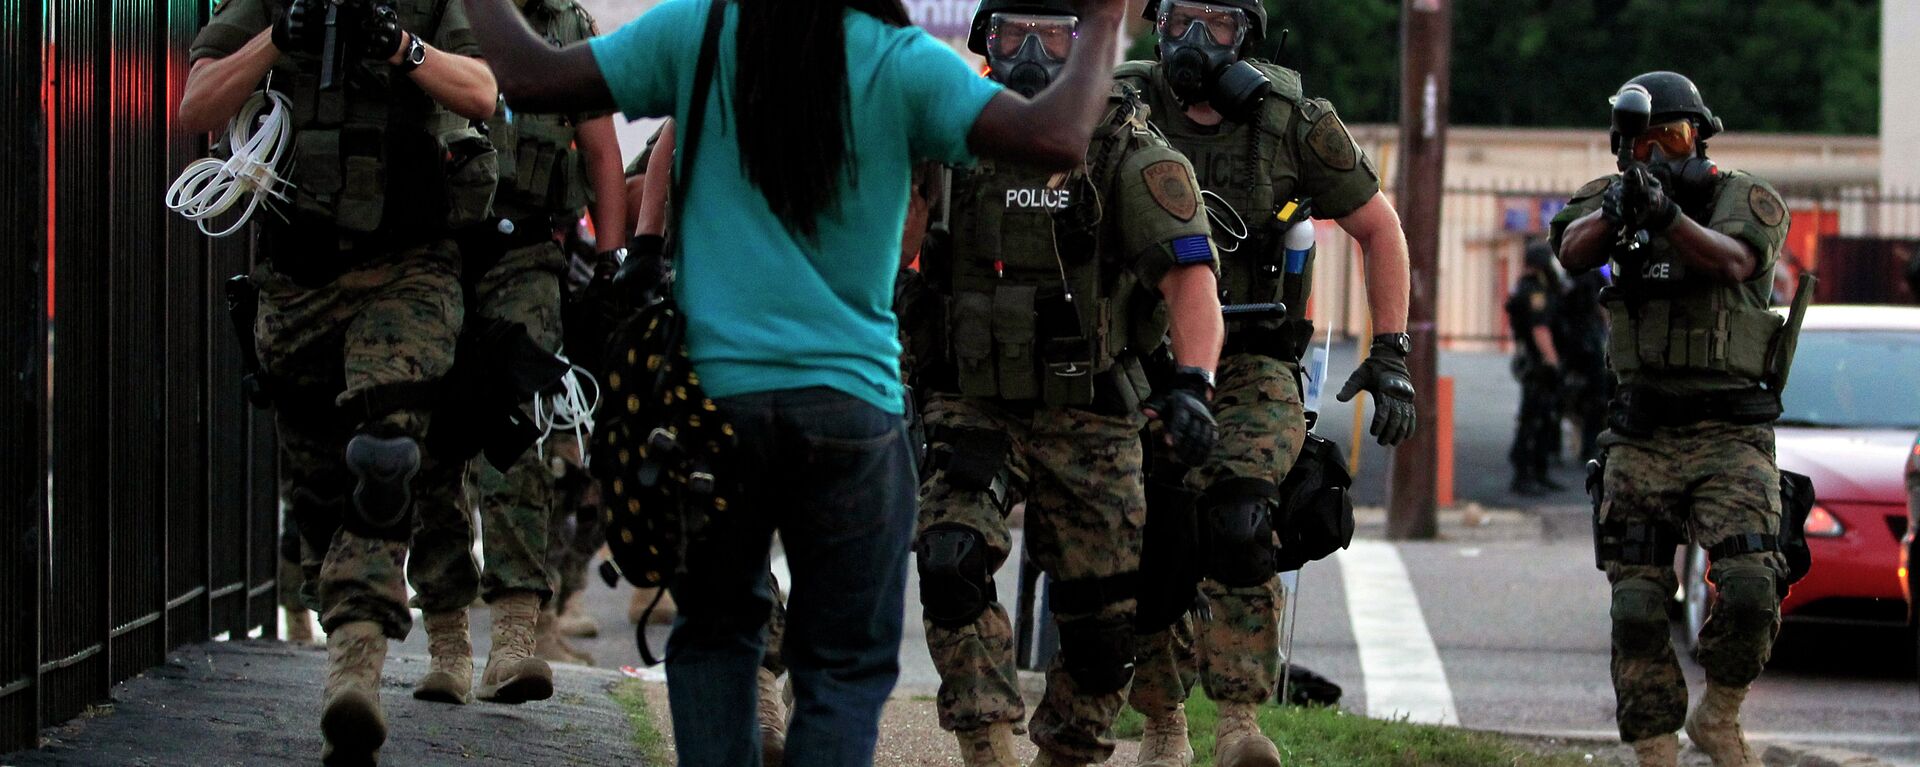 In this Aug. 11, 2014, file photo, police wearing riot gear walk toward a man with his hands raised Monday, Aug. 11, 2014, in Ferguson - Sputnik International, 1920, 12.10.2017